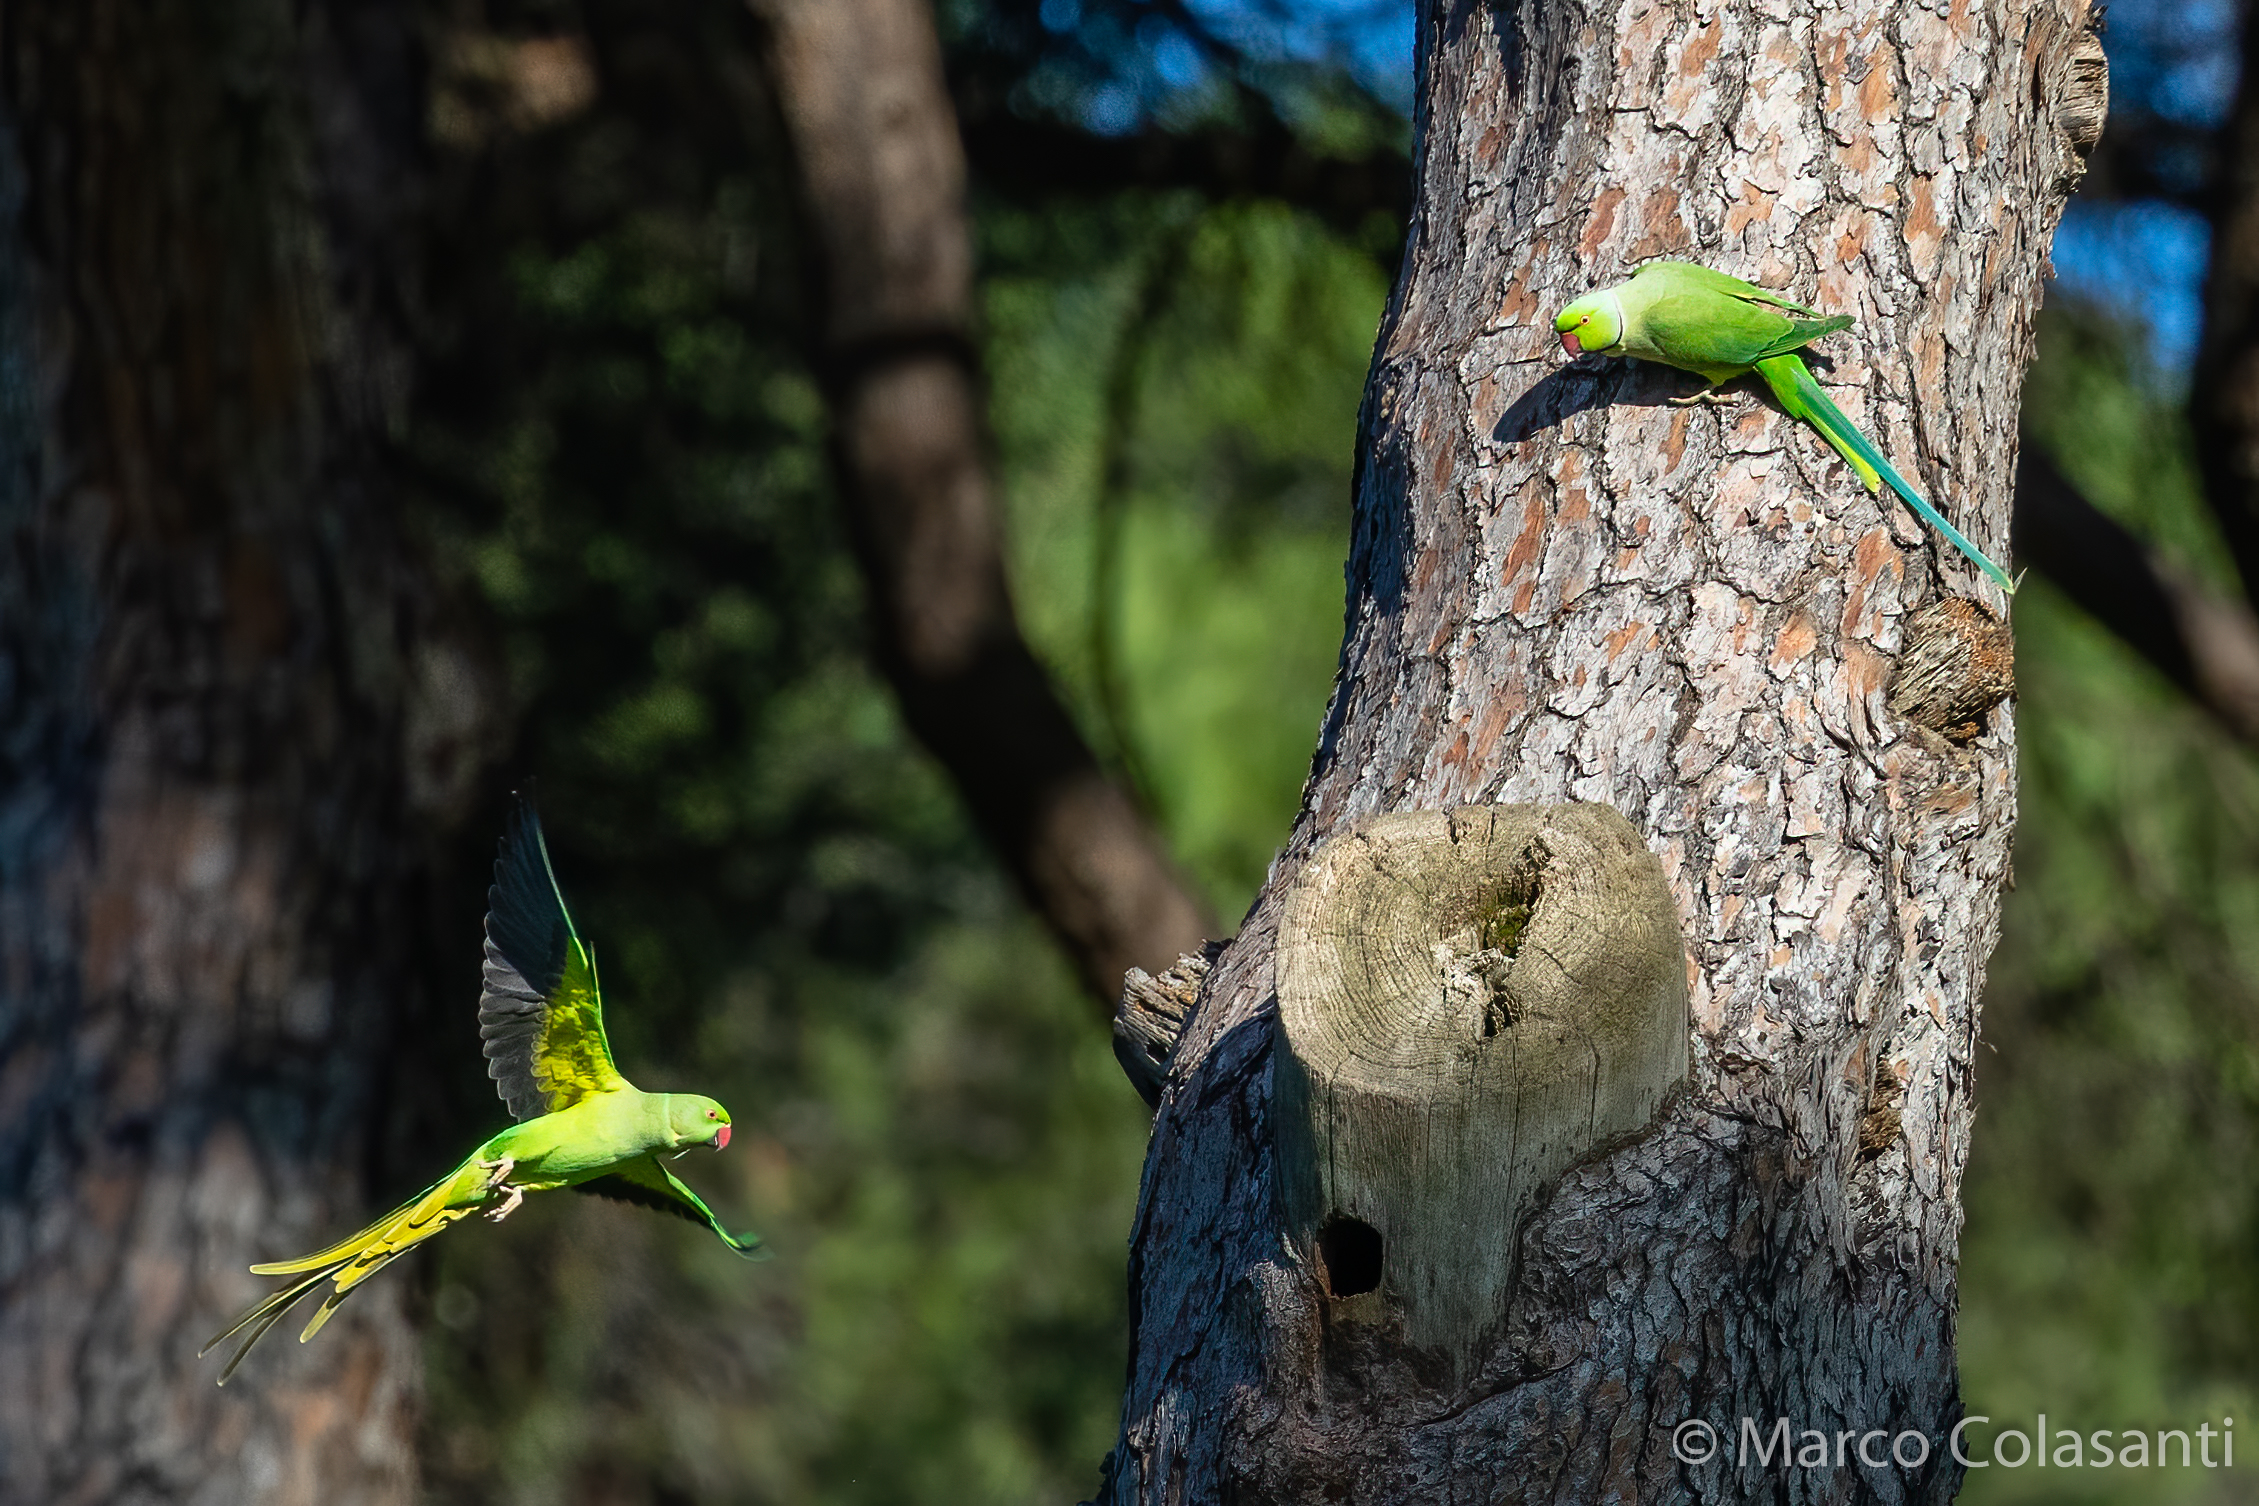 Collared parakeets around the nest...